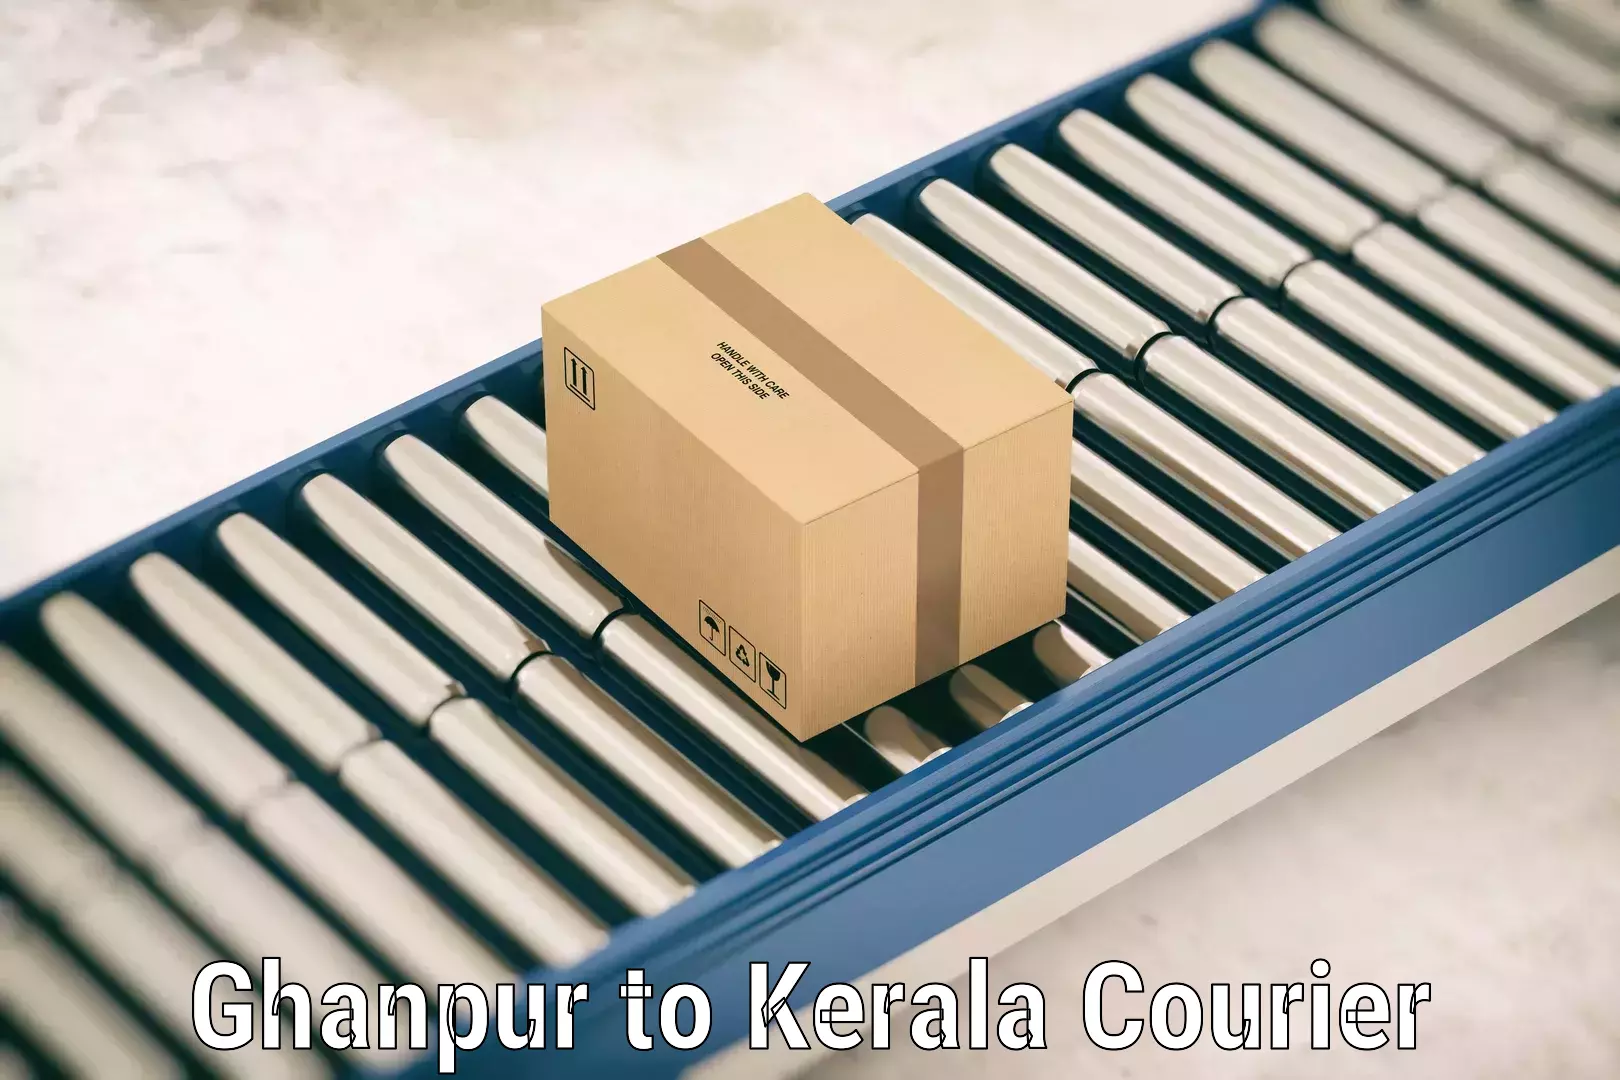 Luggage delivery system Ghanpur to Kollam